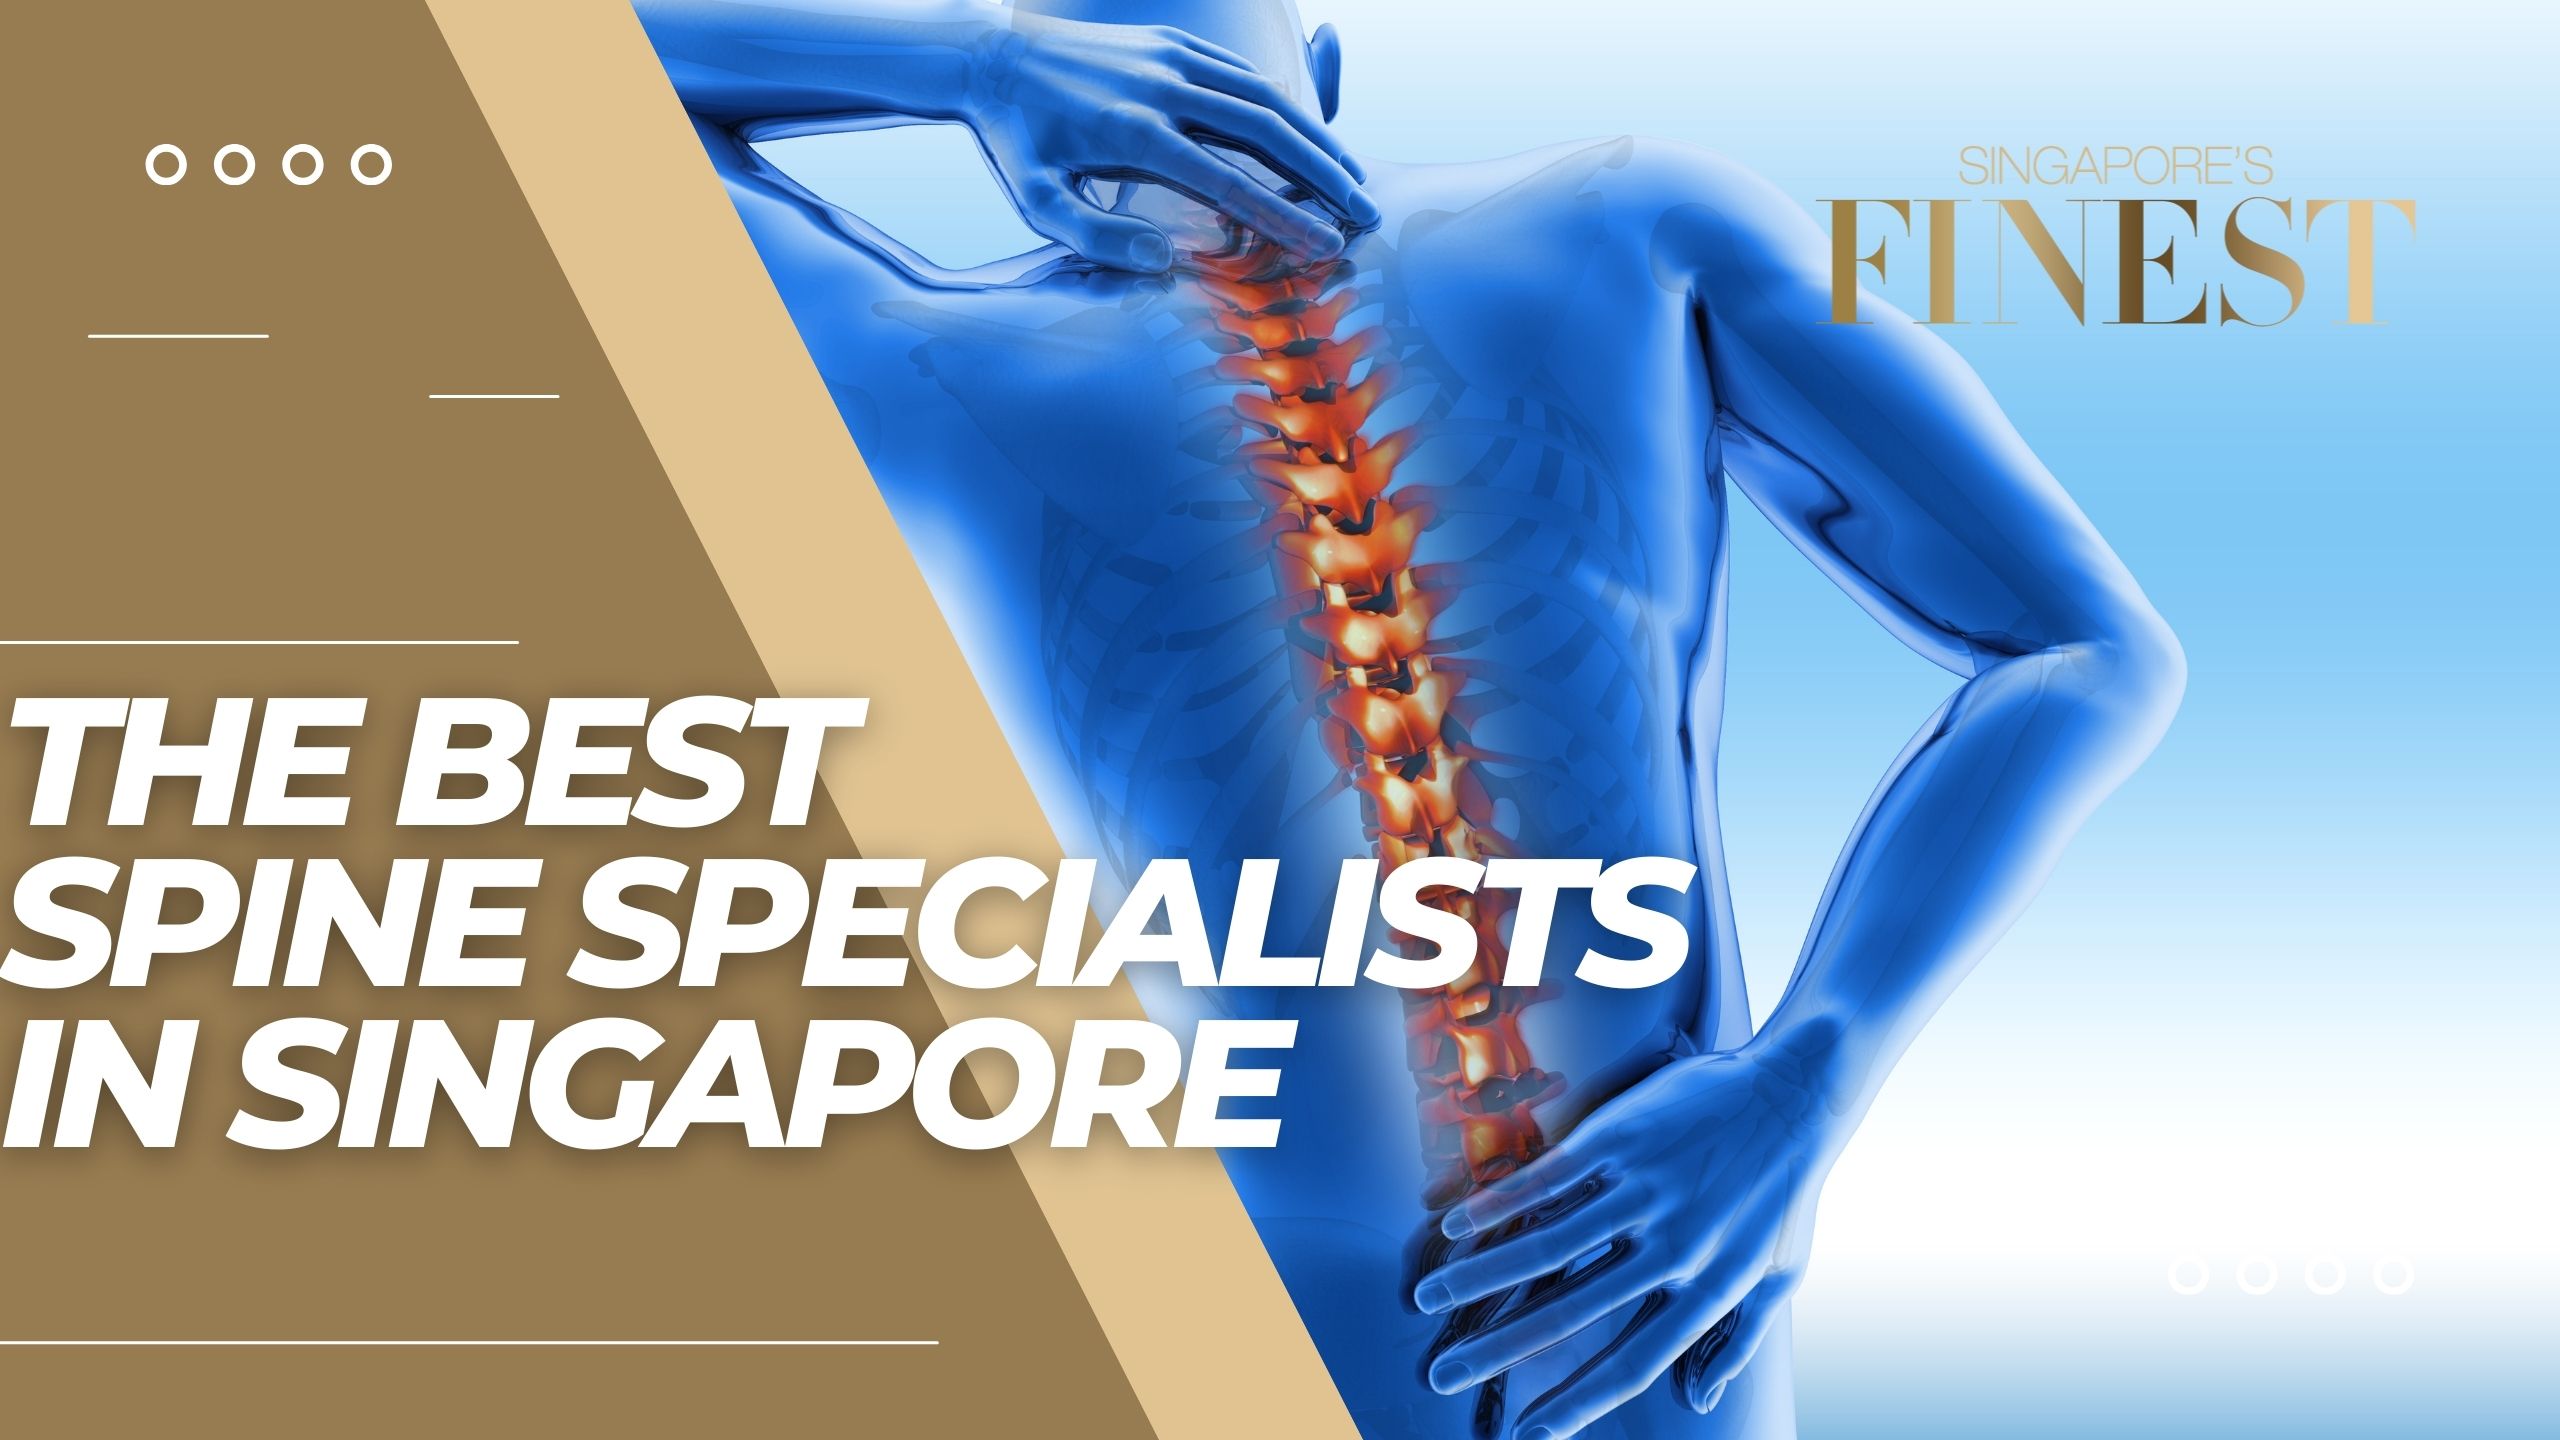 The Finest Spine Specialists in Singapore